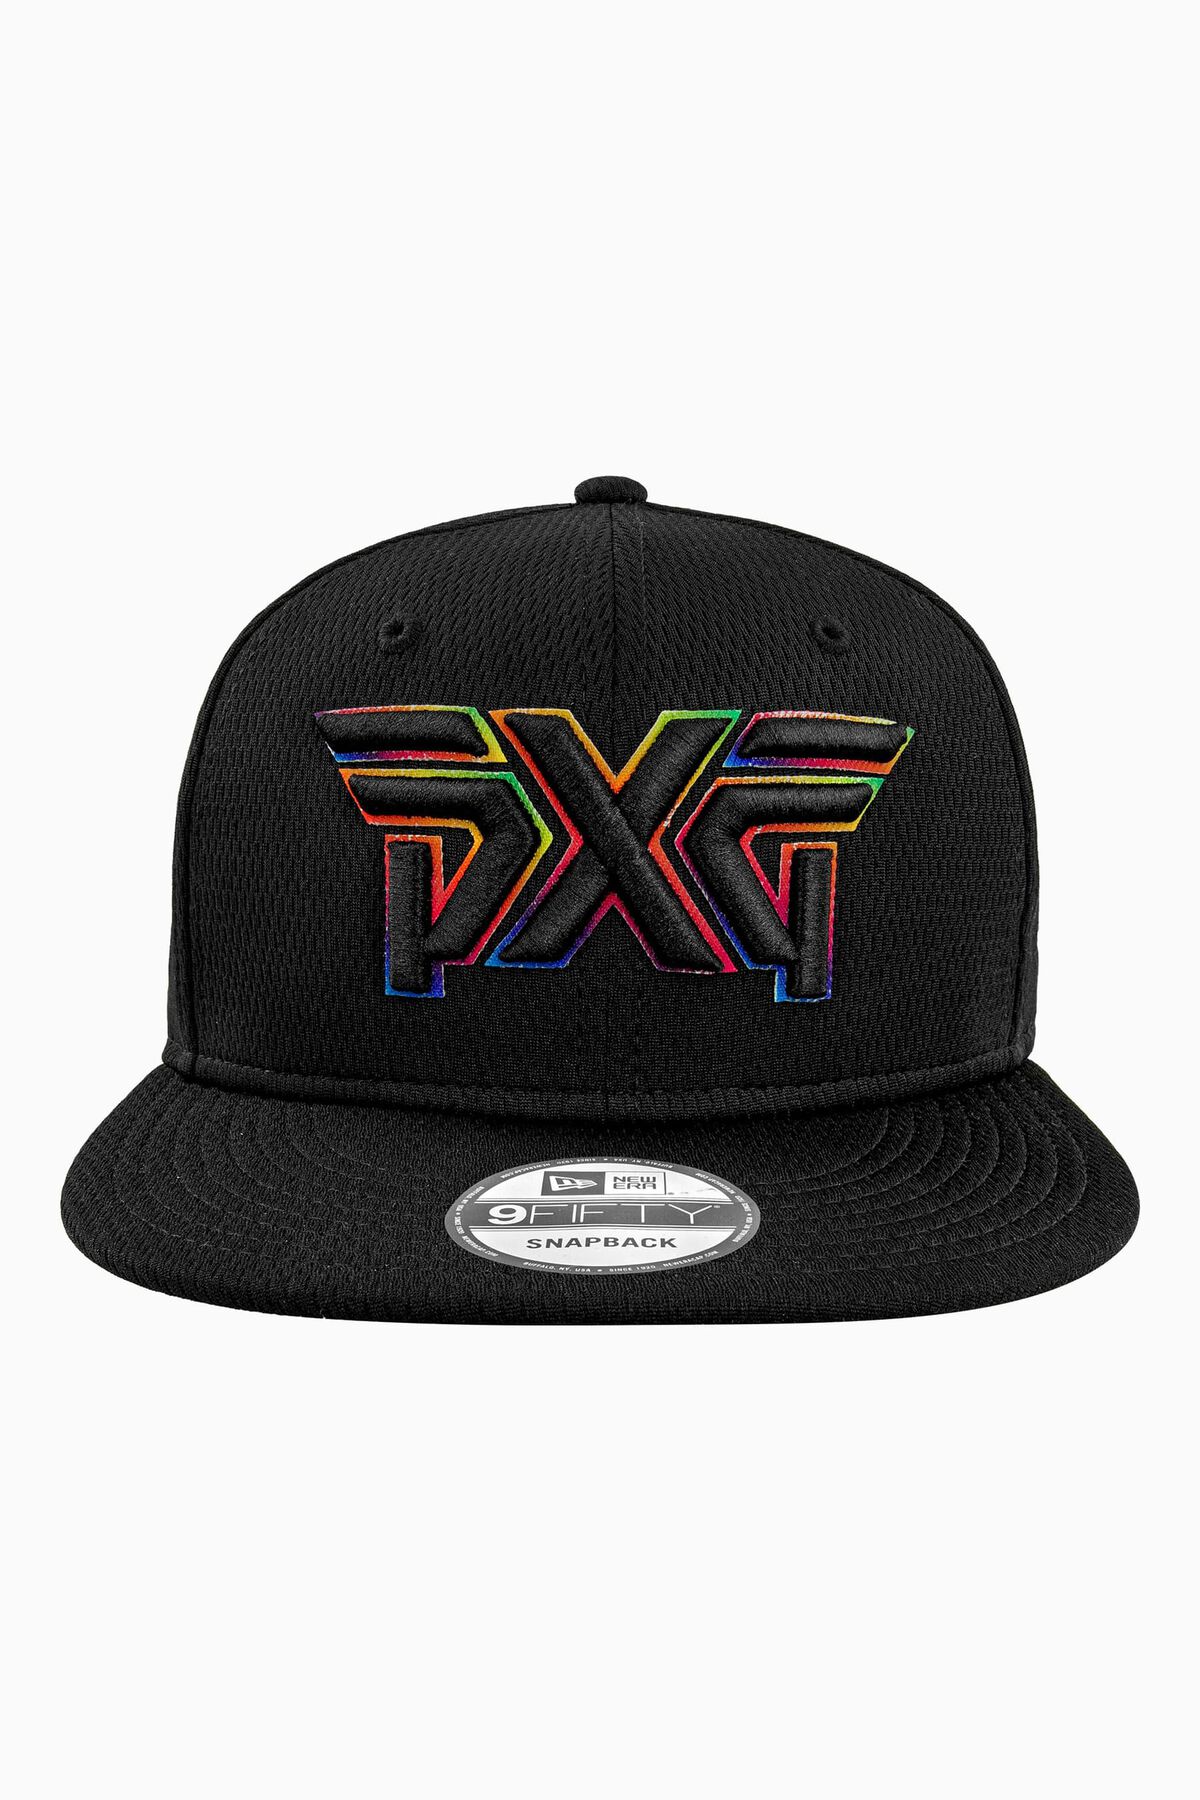 Pride Outline 9FIFTY Snapback 